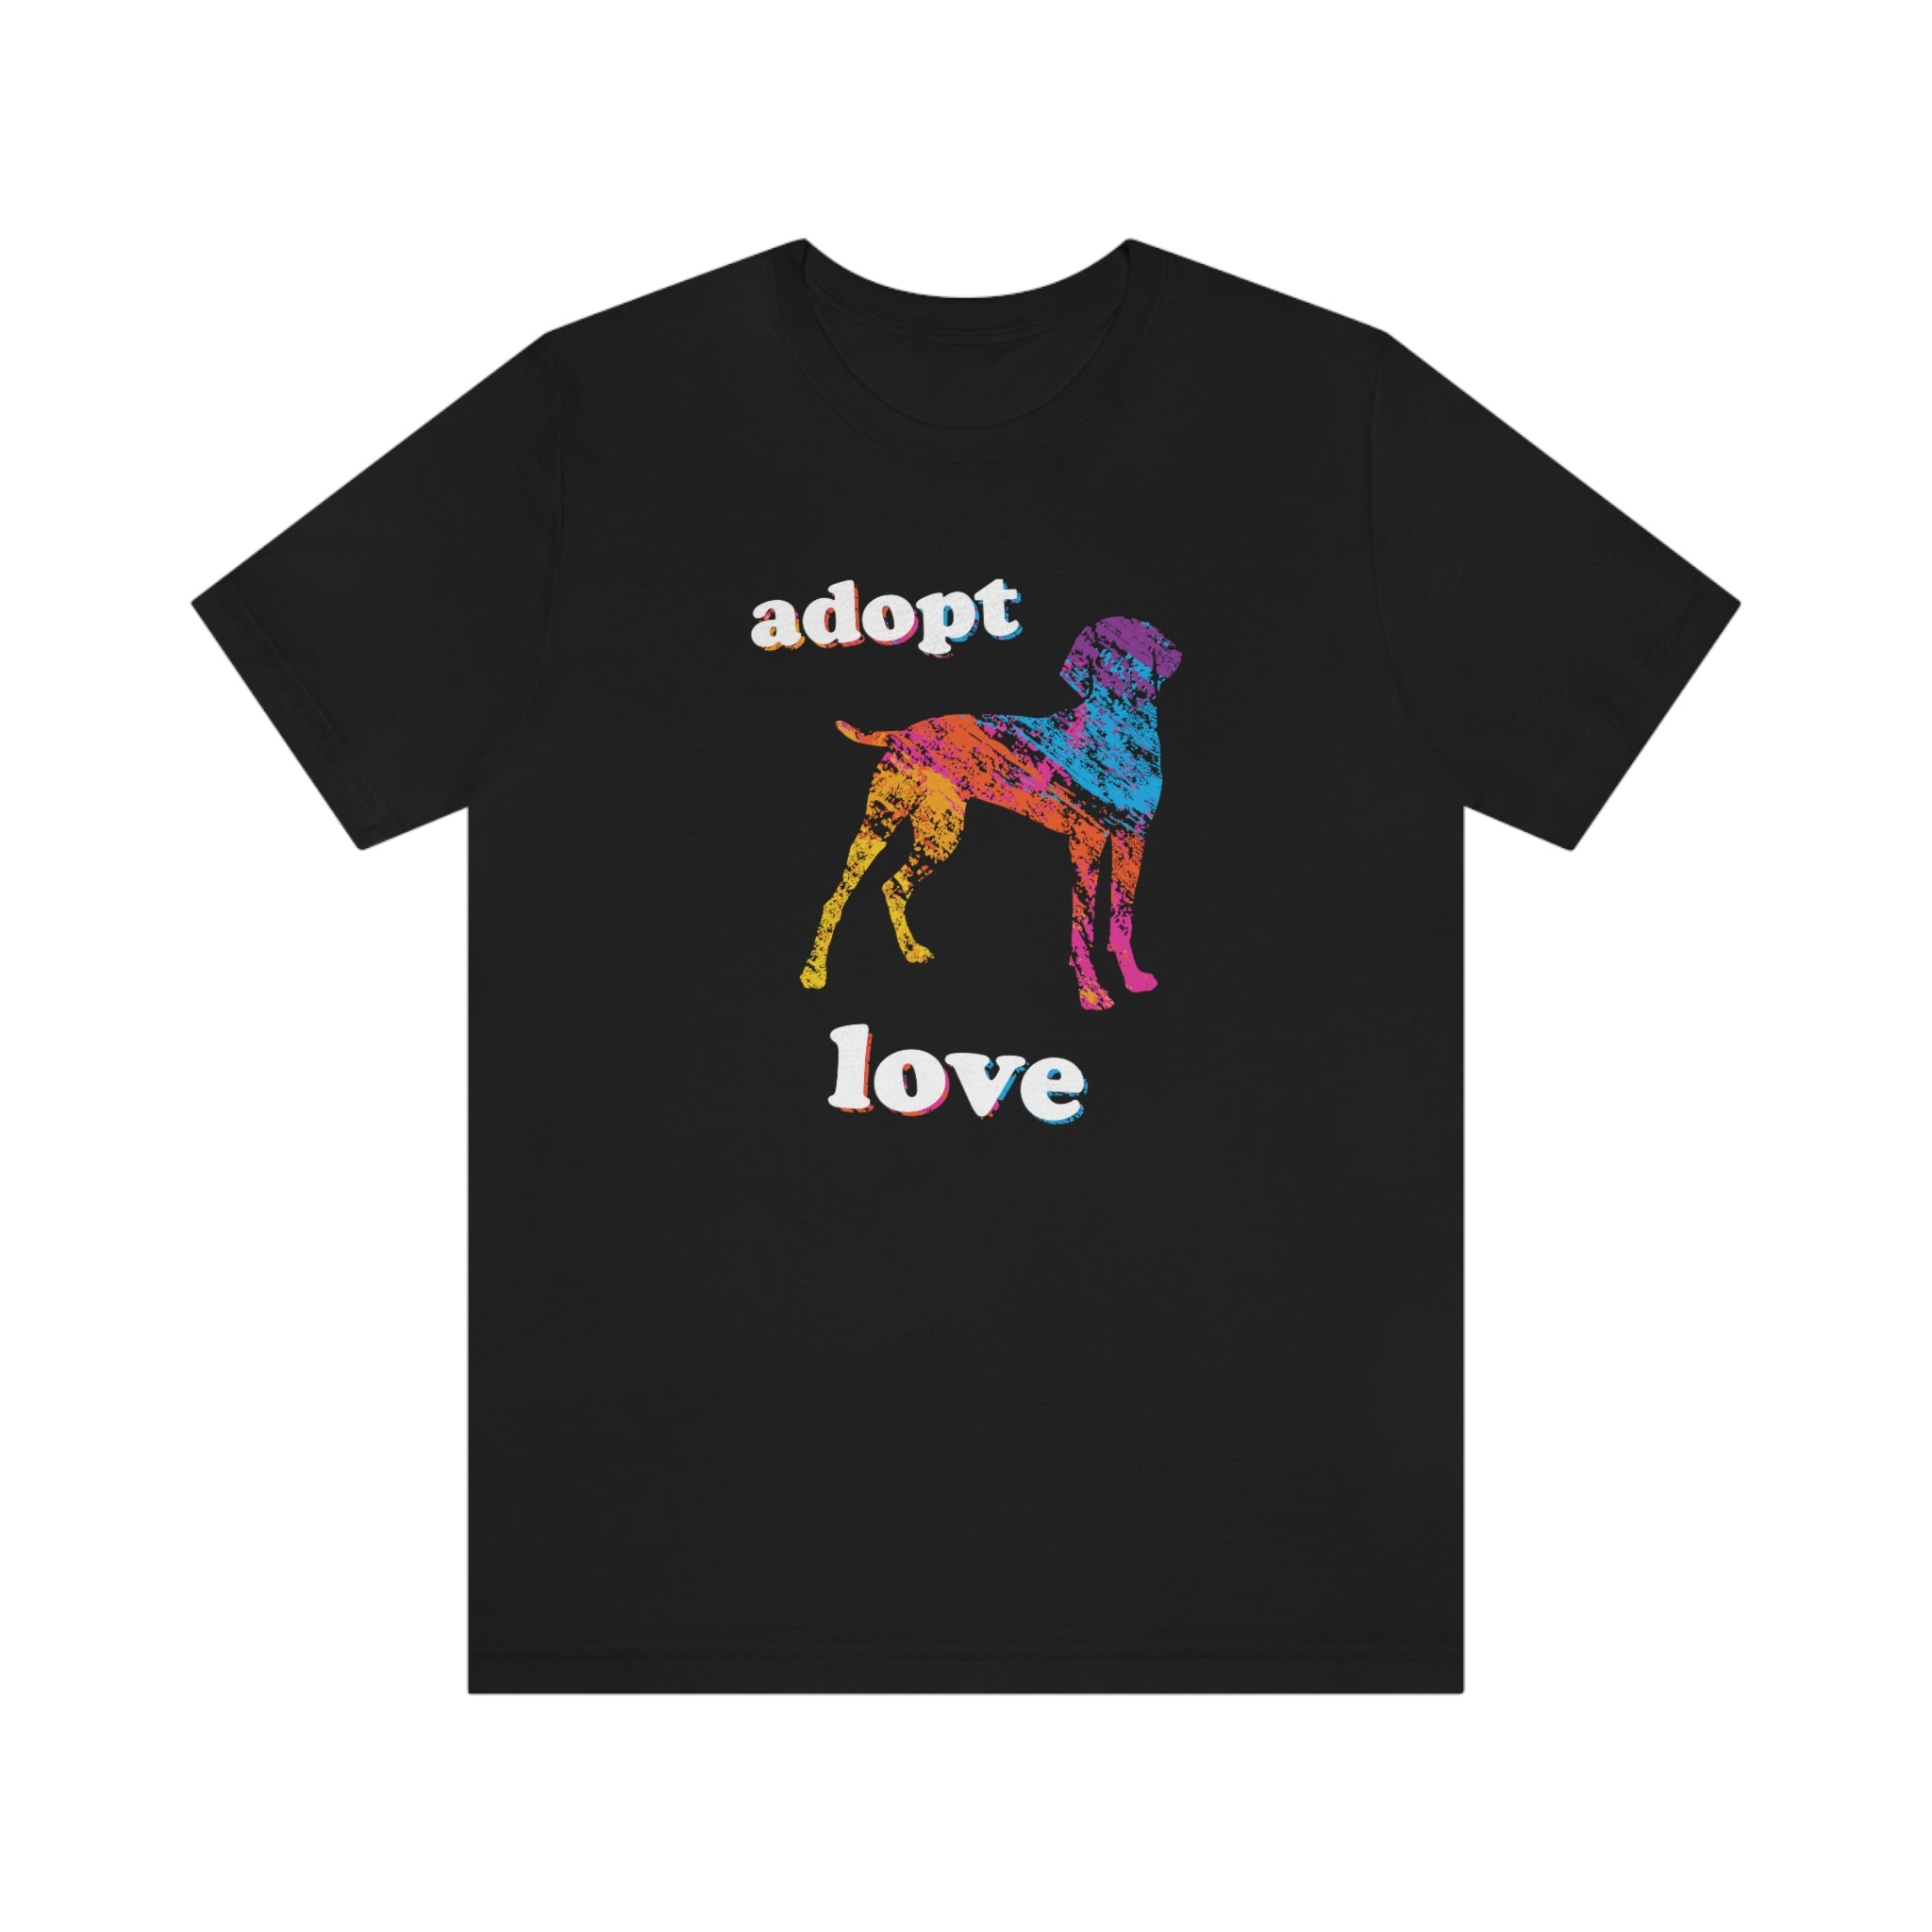 Adopt Love Dog - White Lettering : Unisex 100% Comfy Cotton T-Shirt, Supporting Humane Animal Shelters